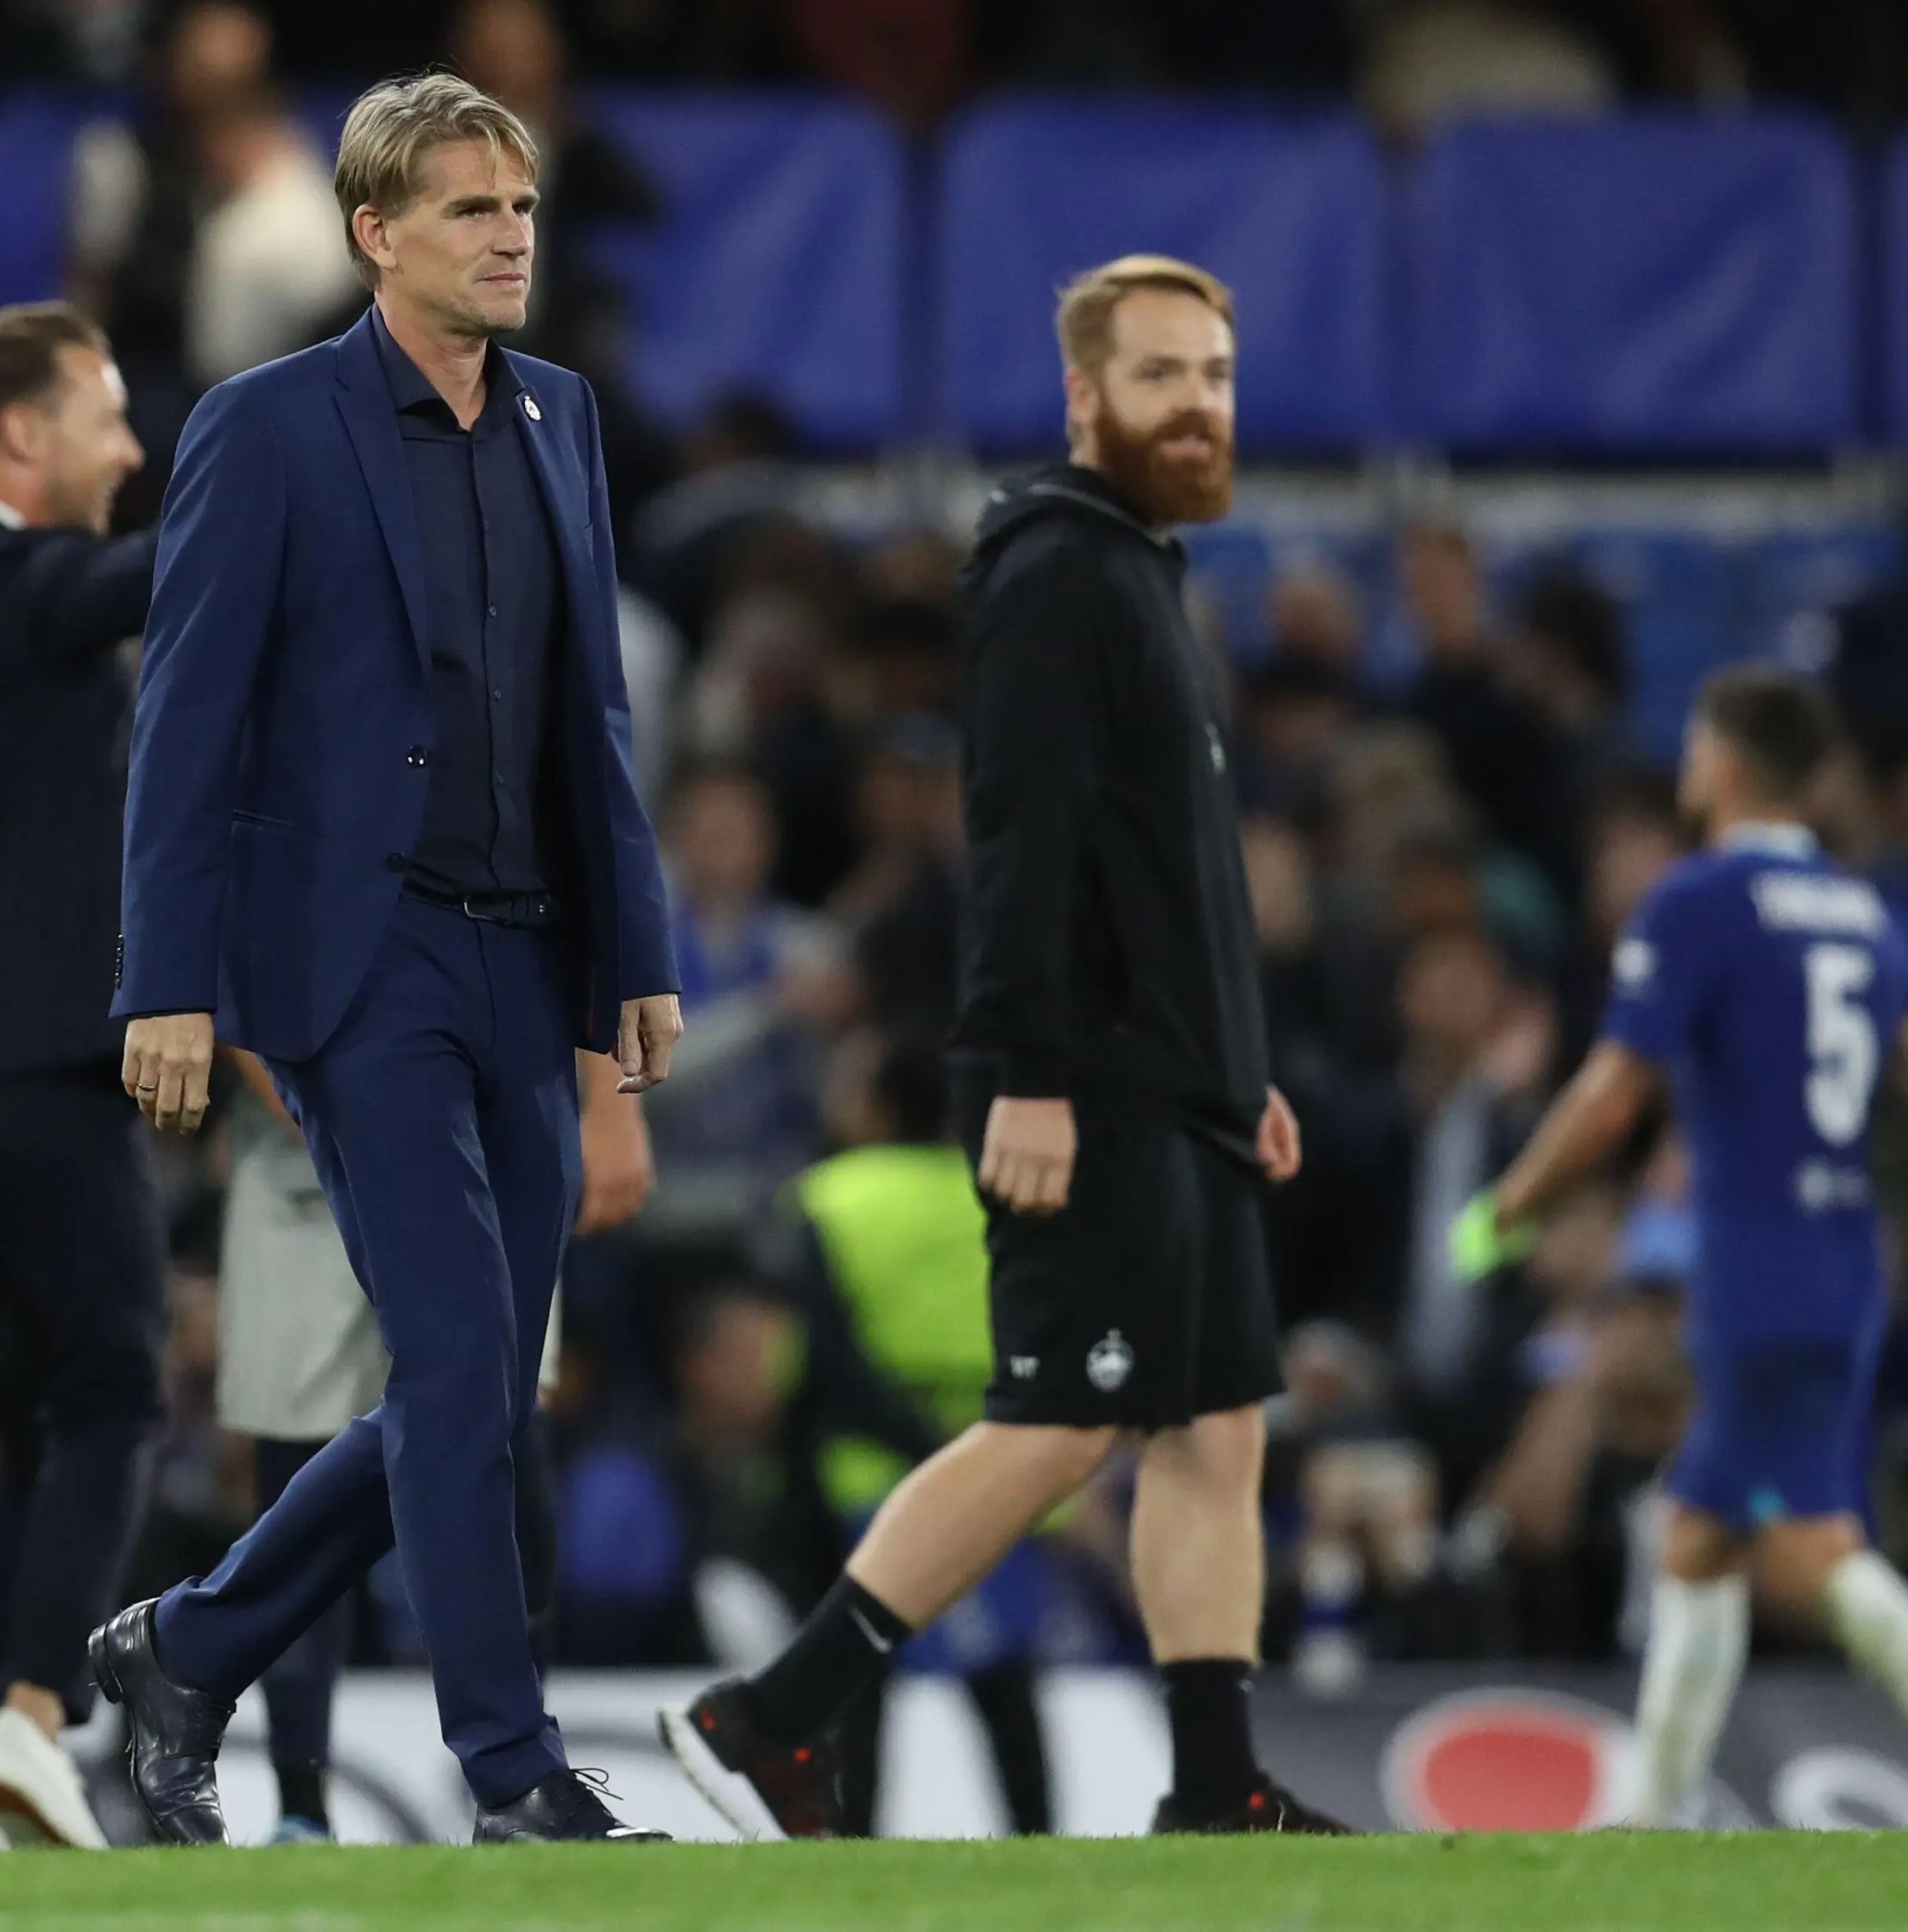 , Red Bull Salzburg chief Christophe Freund watches clash against Chelsea as he is linked with Blues sporting director job